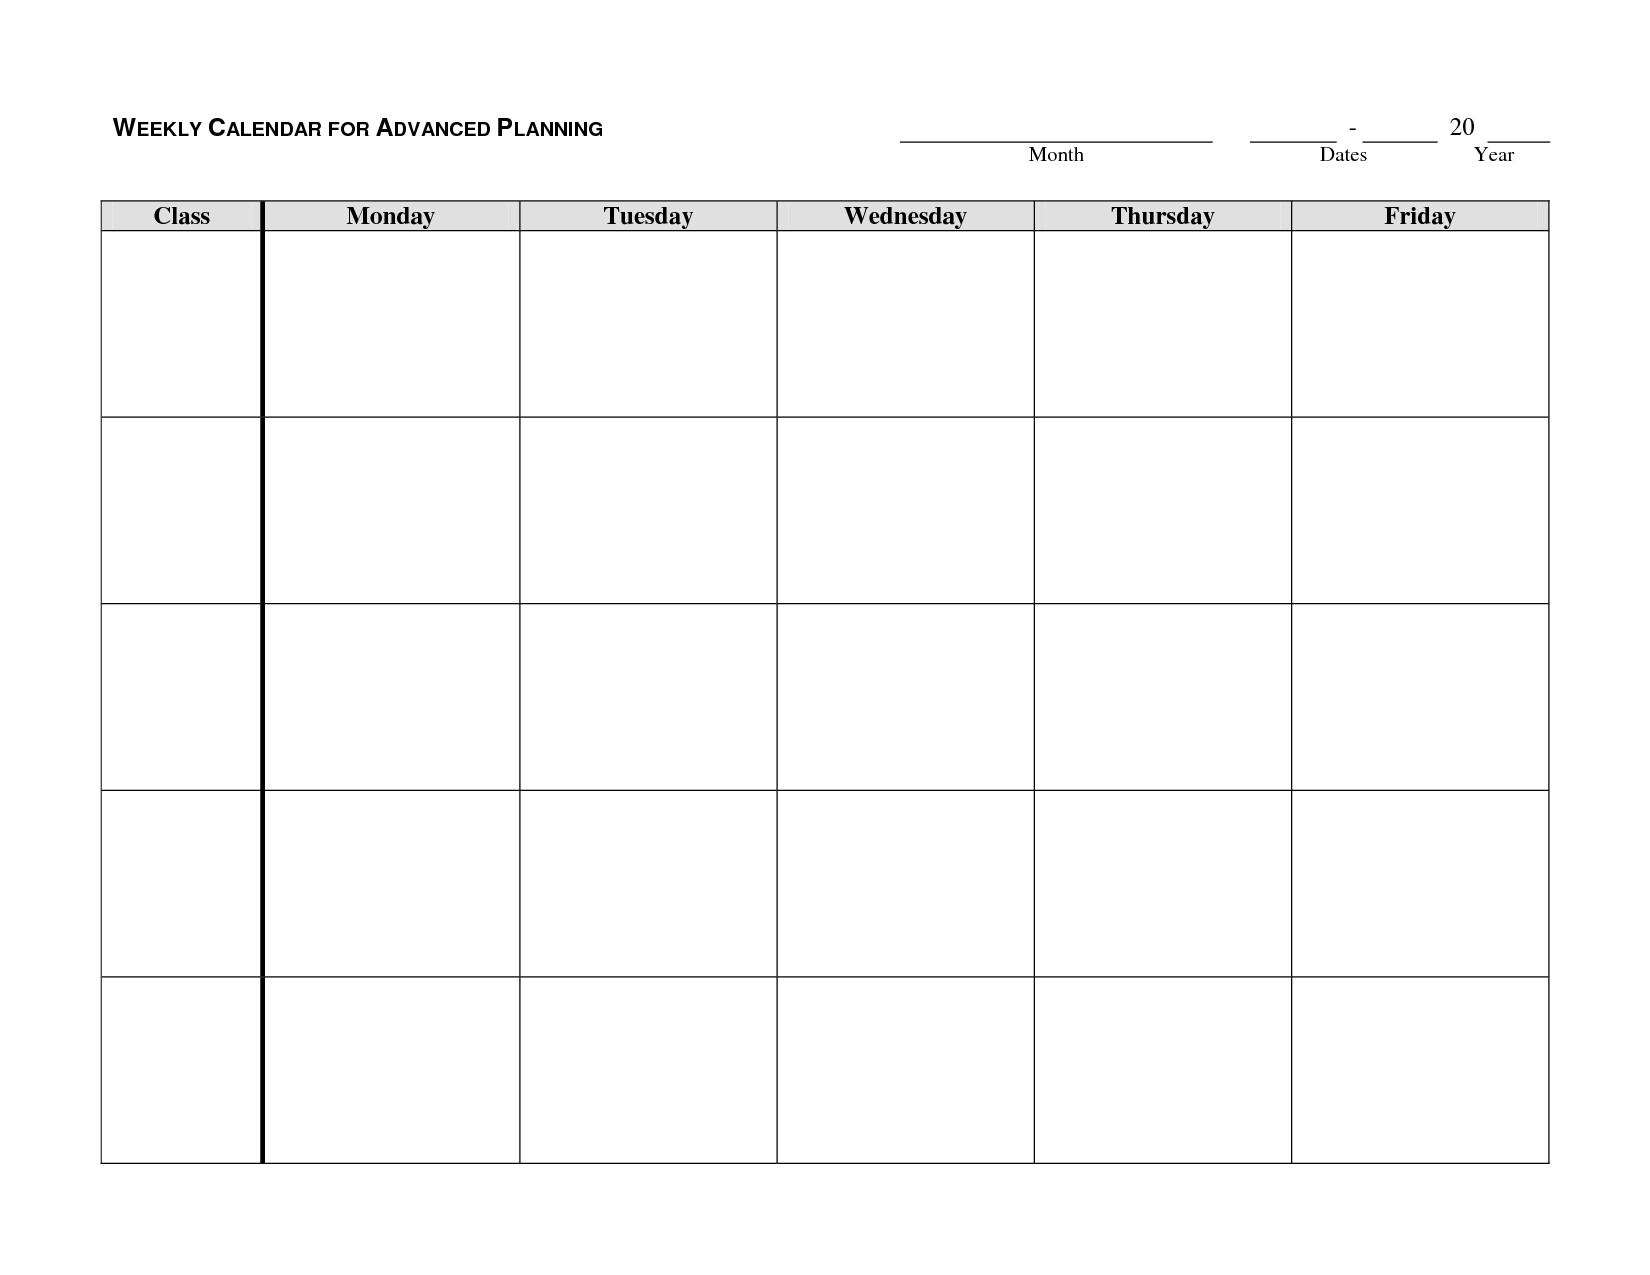 Monday To Friday Schedule Printable | Template Calendar Printable with Printable Appointment Calendars Monday Through Friday